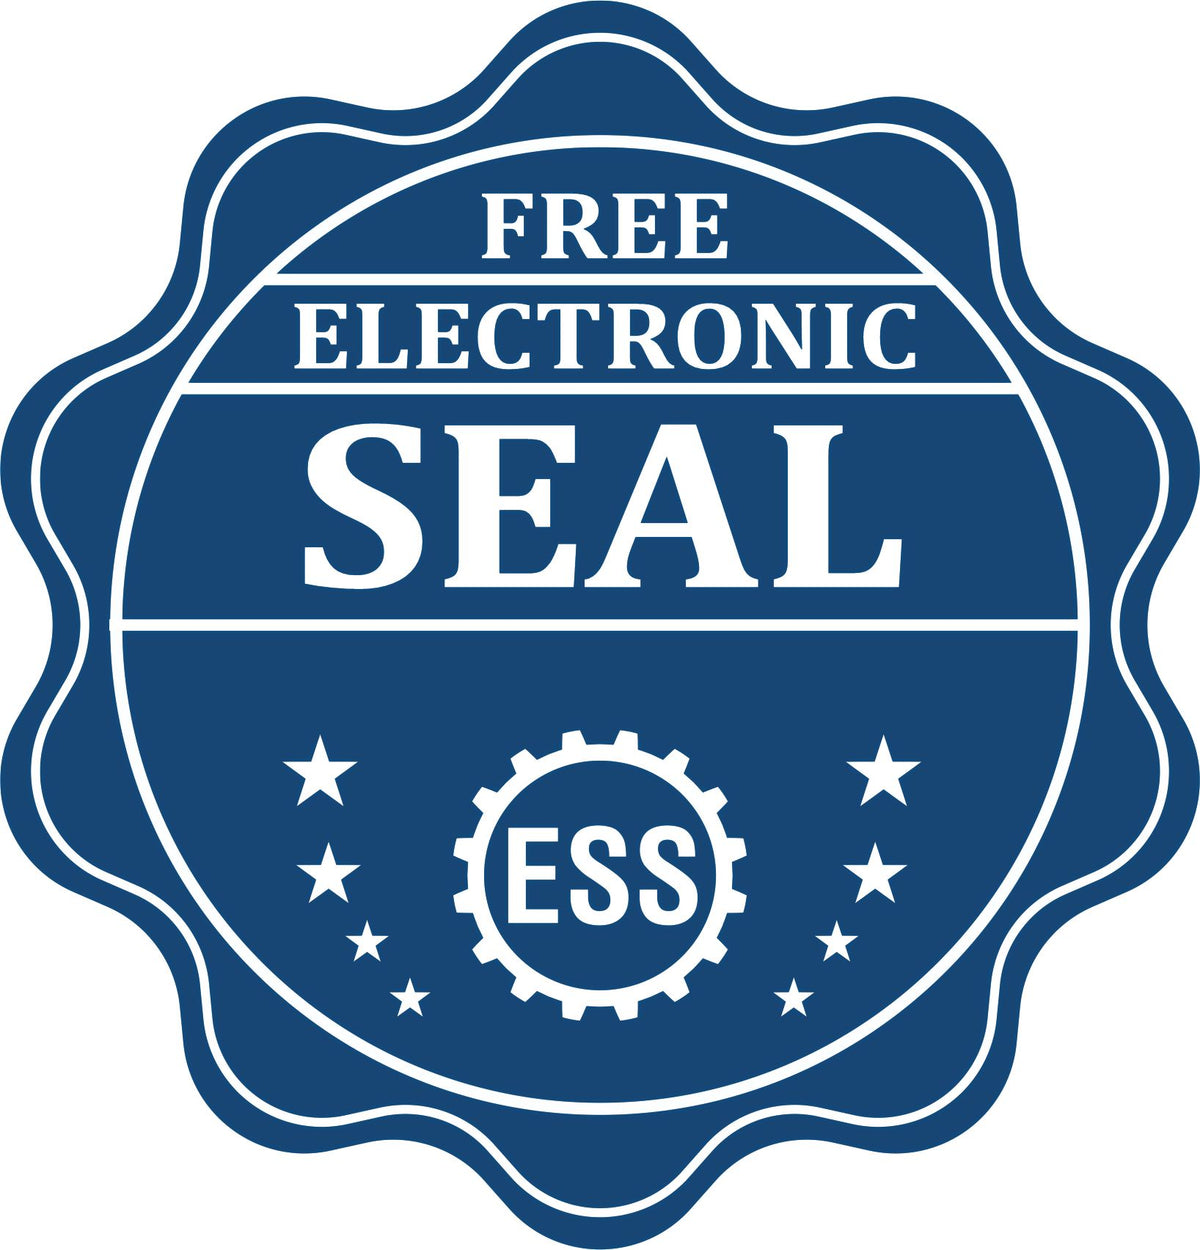 A badge showing a free electronic seal for the Heavy Duty Cast Iron Nebraska Engineer Seal Embosser with stars and the ESS gear on the emblem.